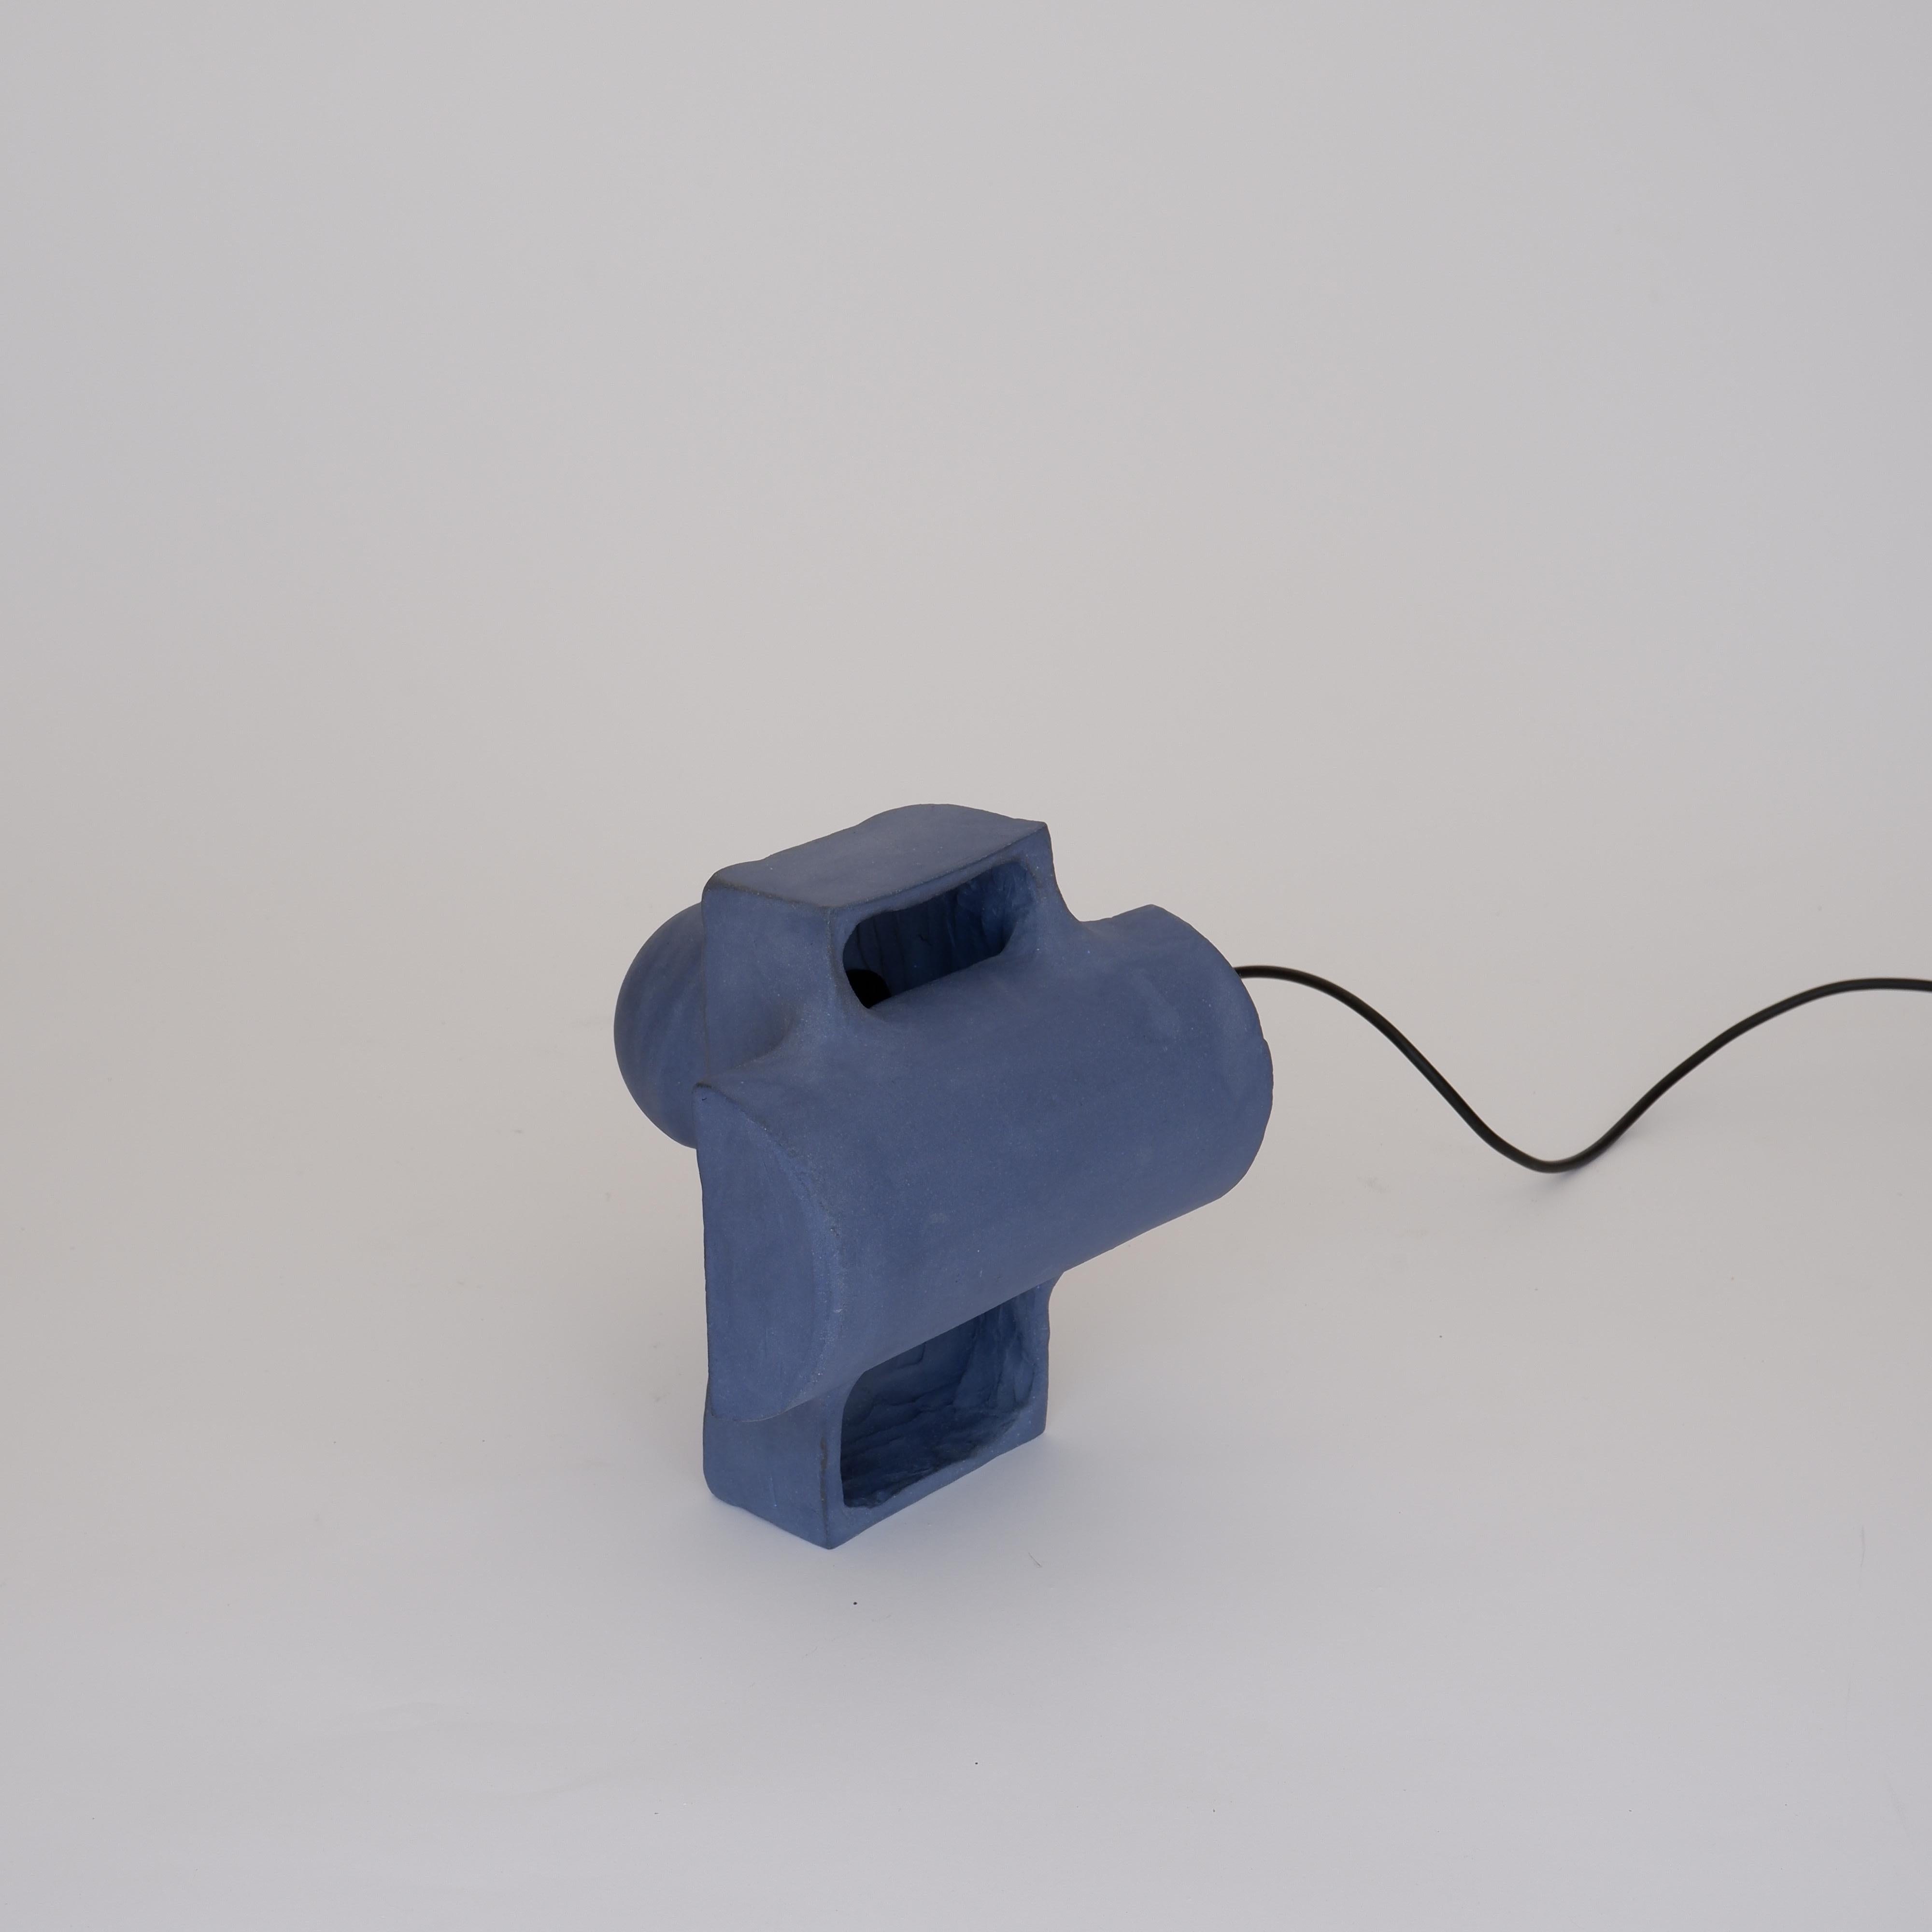 Accre Small Blue Lamp by Ia Kutateladze
One Of A Kind.
Dimensions: D 20 x W 23 x H 22 cm.
Materials: Clay.

Each piece is one of a kind, due to its free hand-building process. Different color variations available: raw black clay, raw white clay, raw